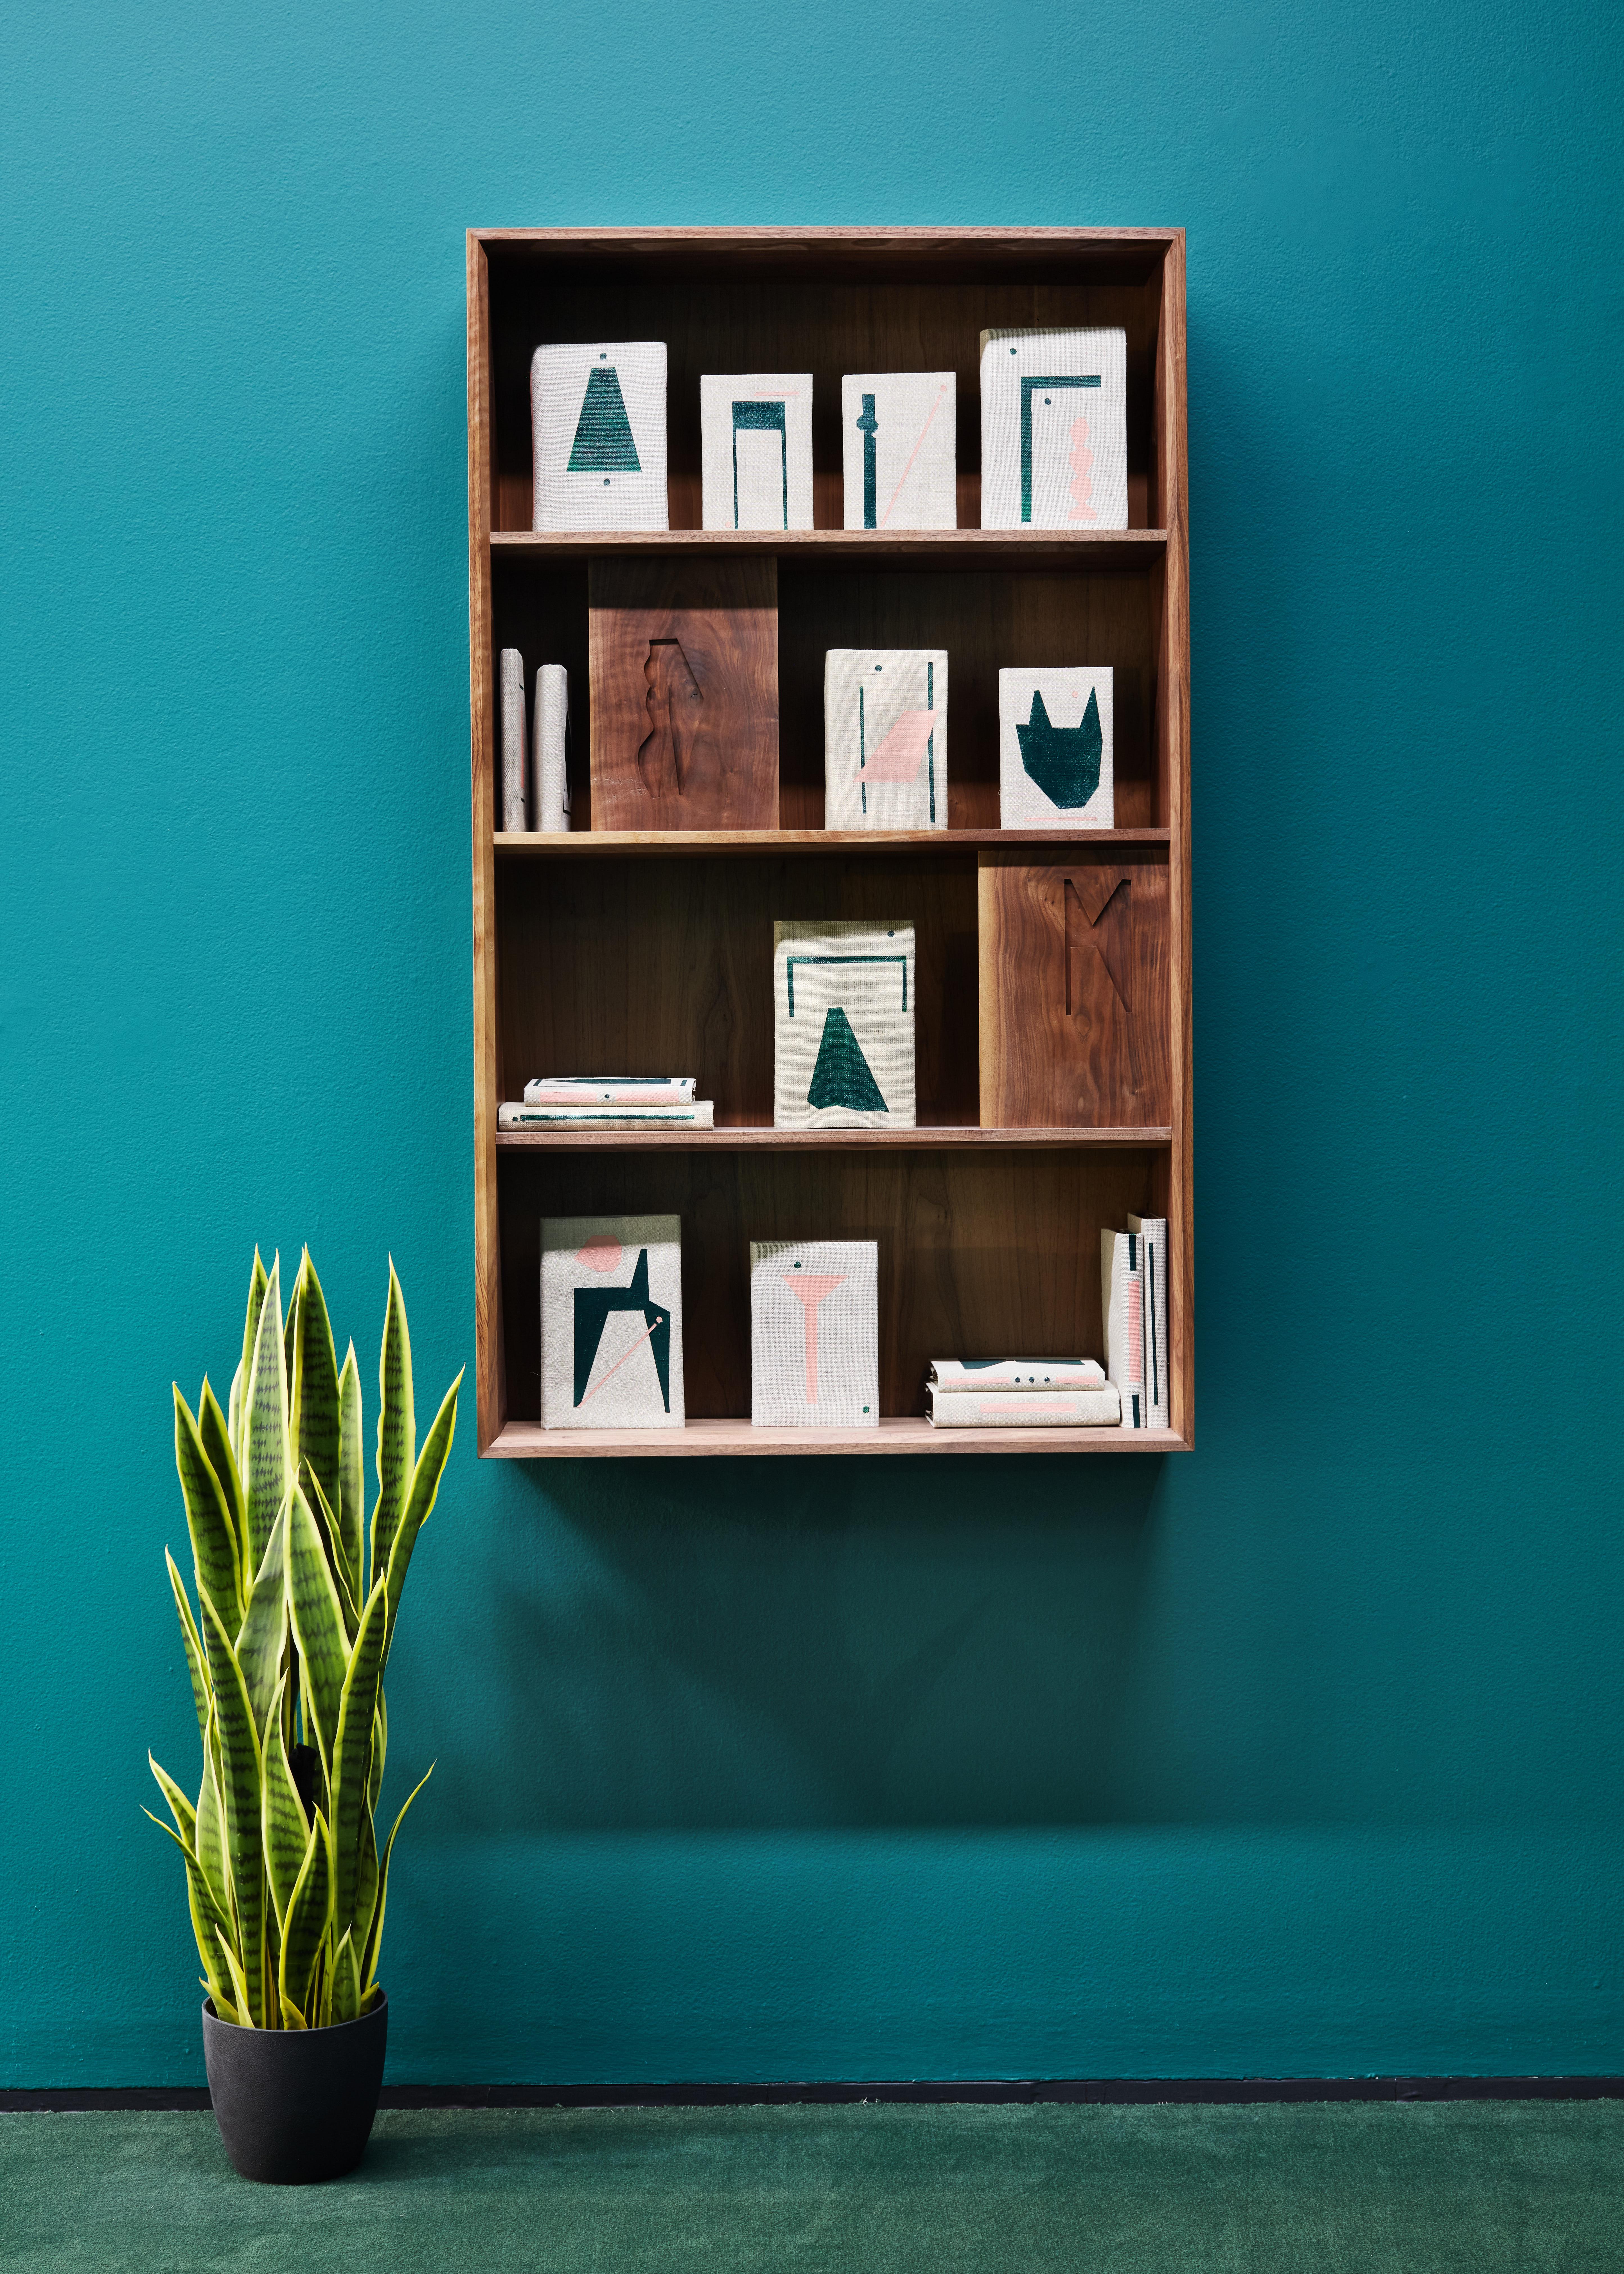 A wooden bookshelf hangs on a dark green wall next to a potted plant